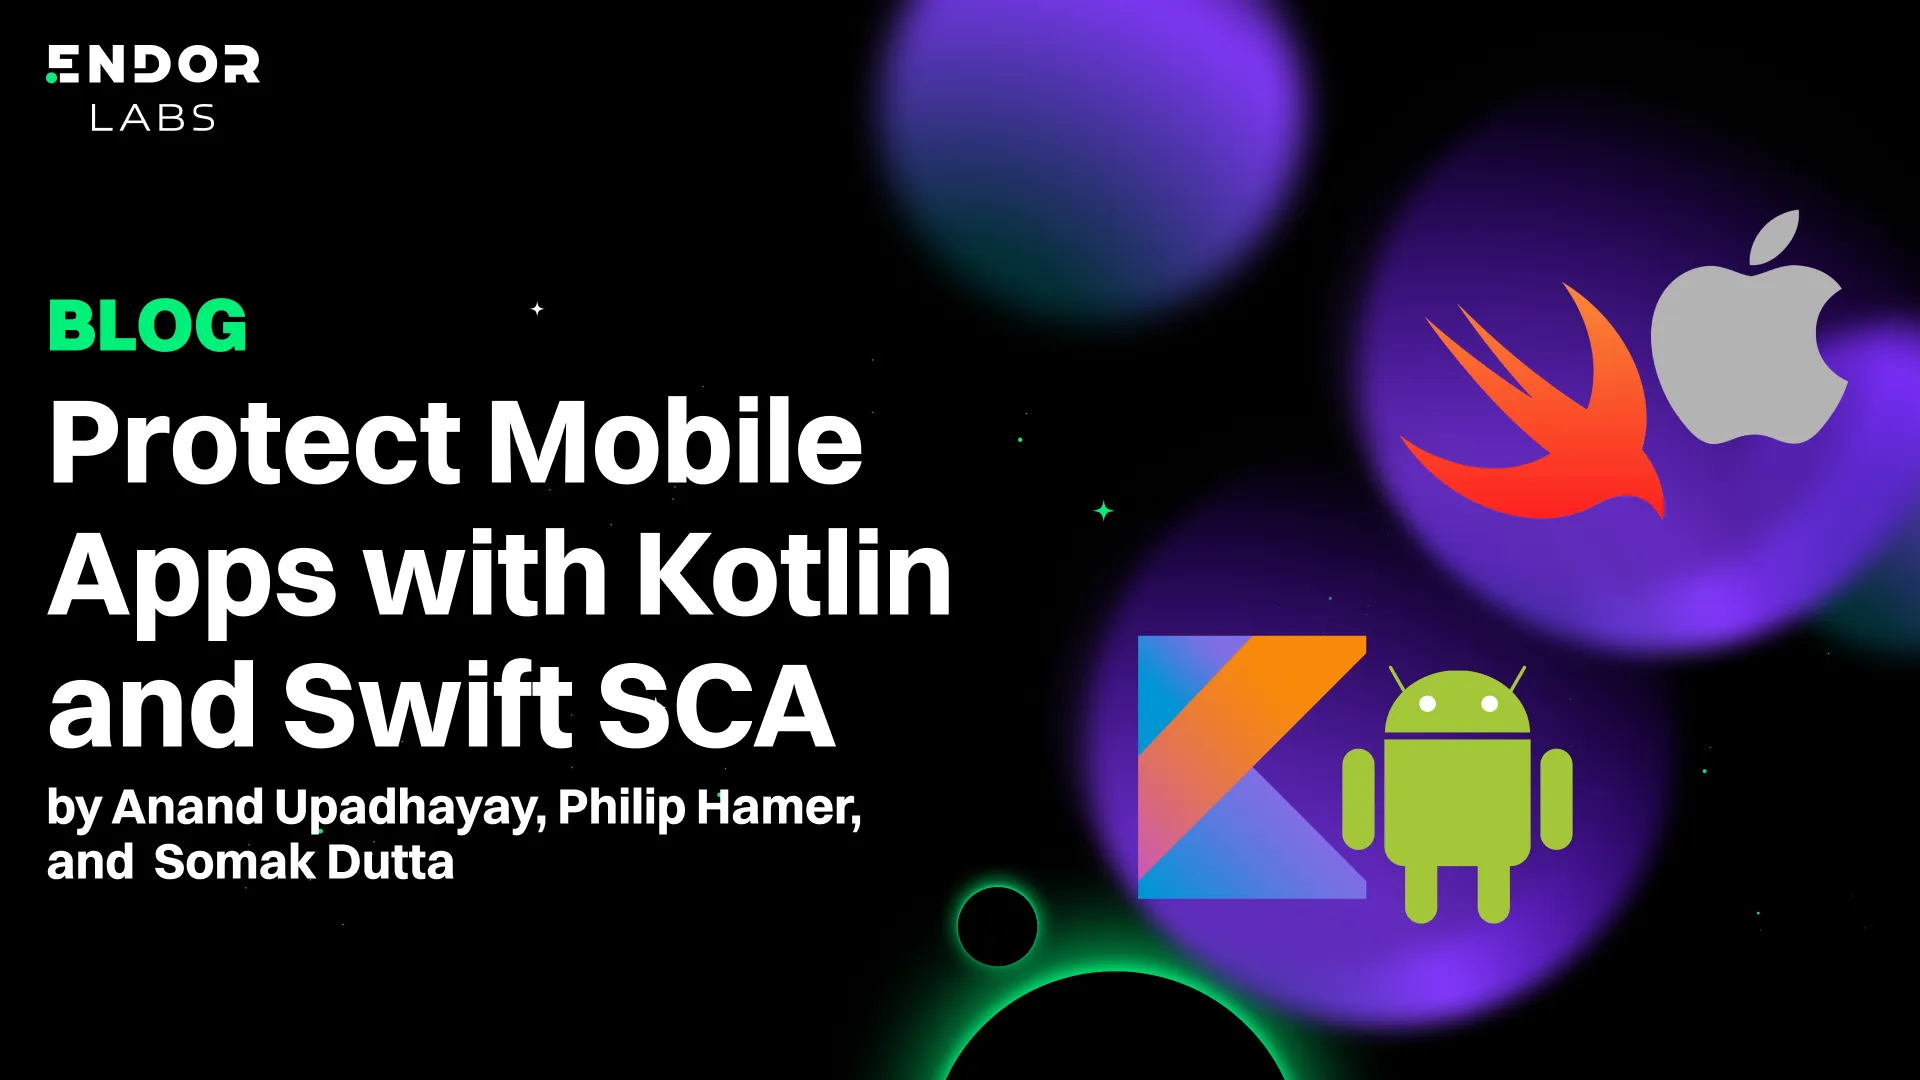 Protect Mobile Apps with Kotlin and Swift SCA